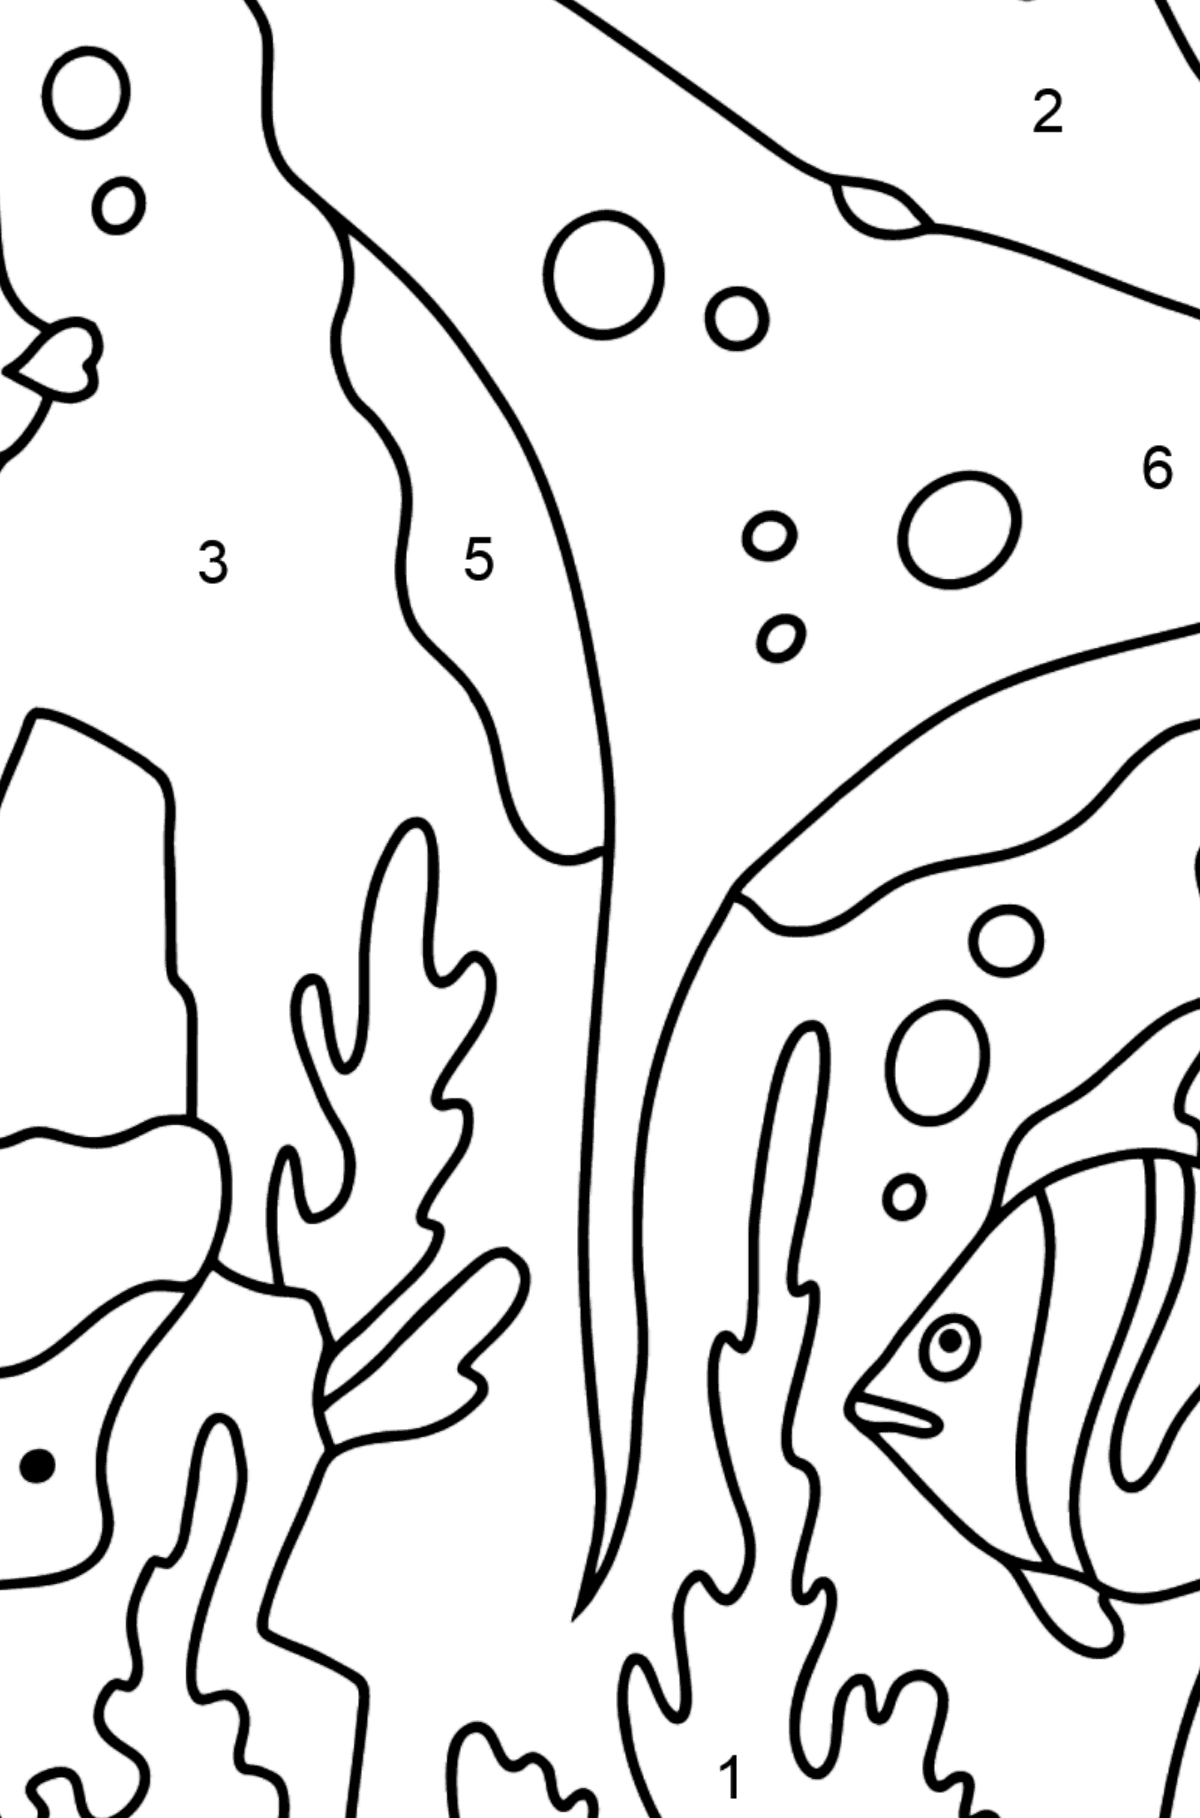 Coloring Page - Fish are Playing with a Charming Stingray - Coloring by Numbers for Kids